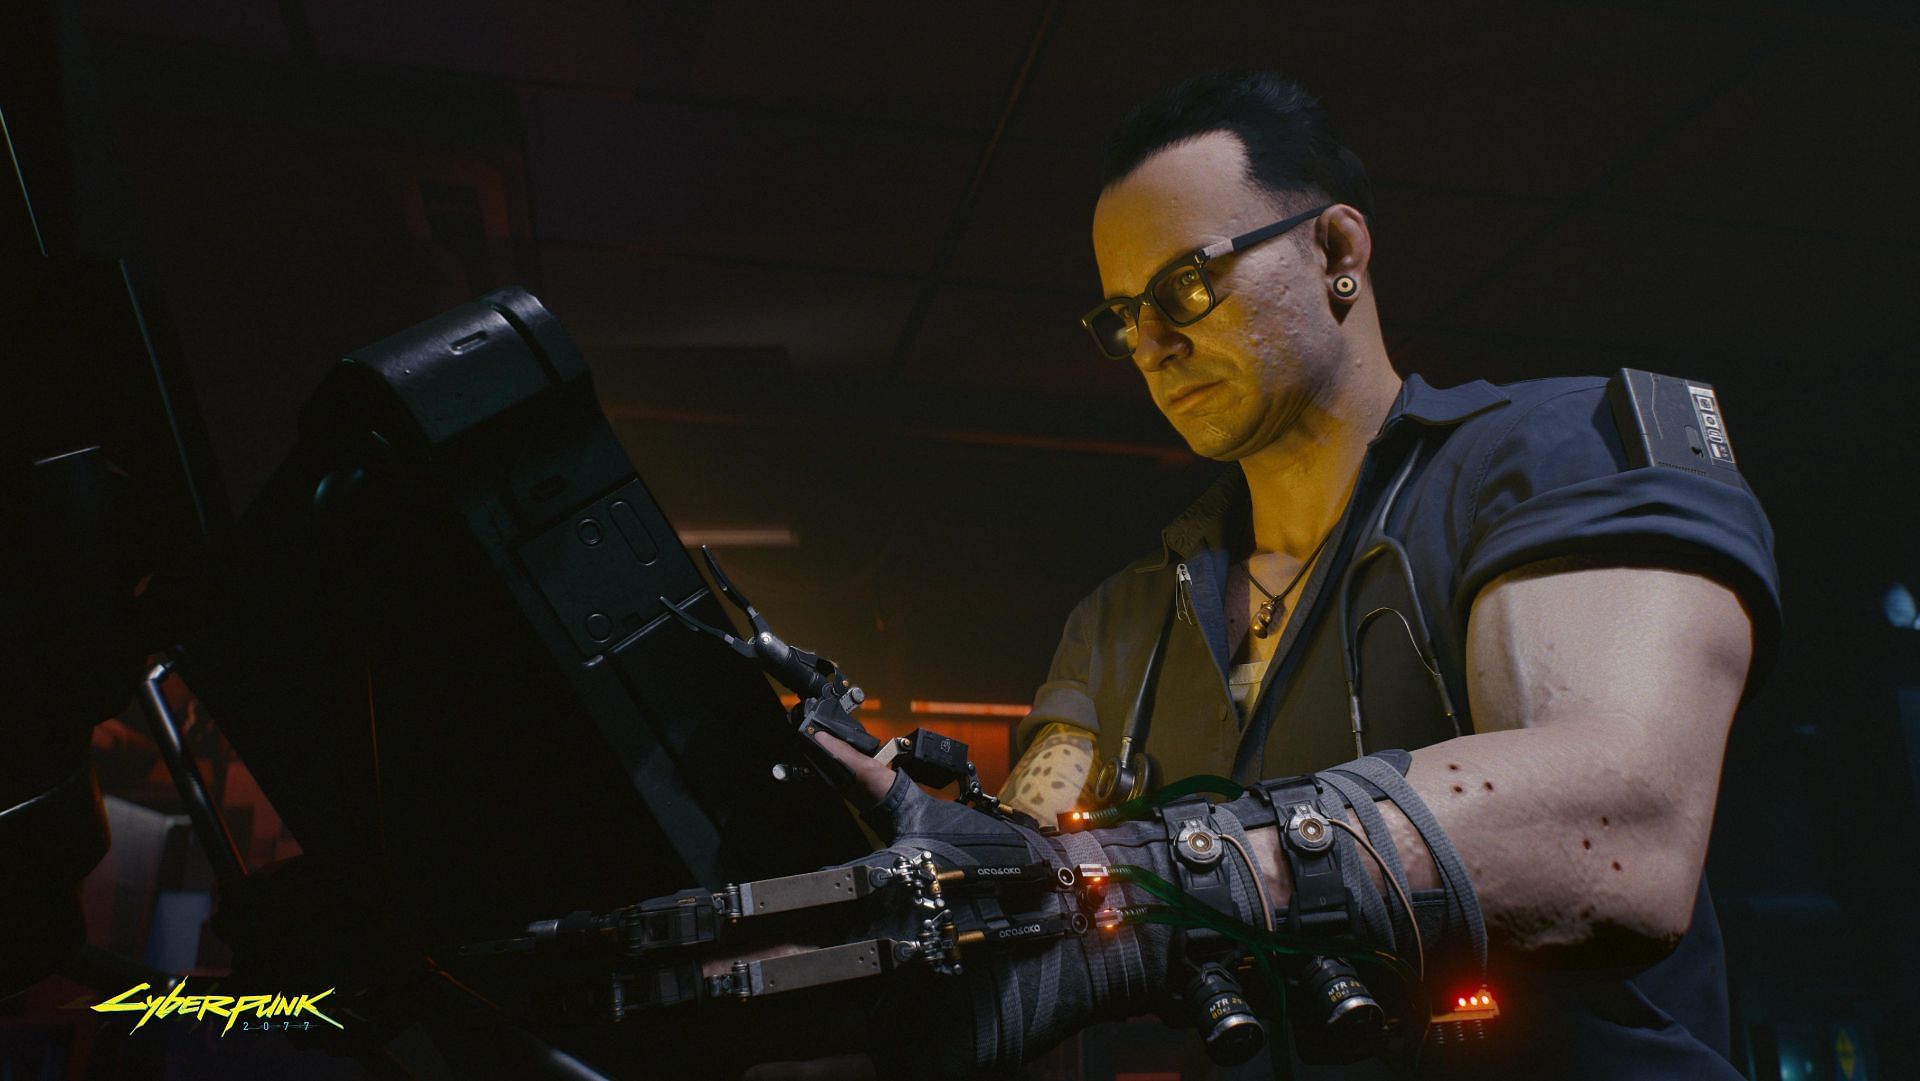 Cyberpunk 2077 features many build options for players to experiment with (Image via CD PROJECT RED)